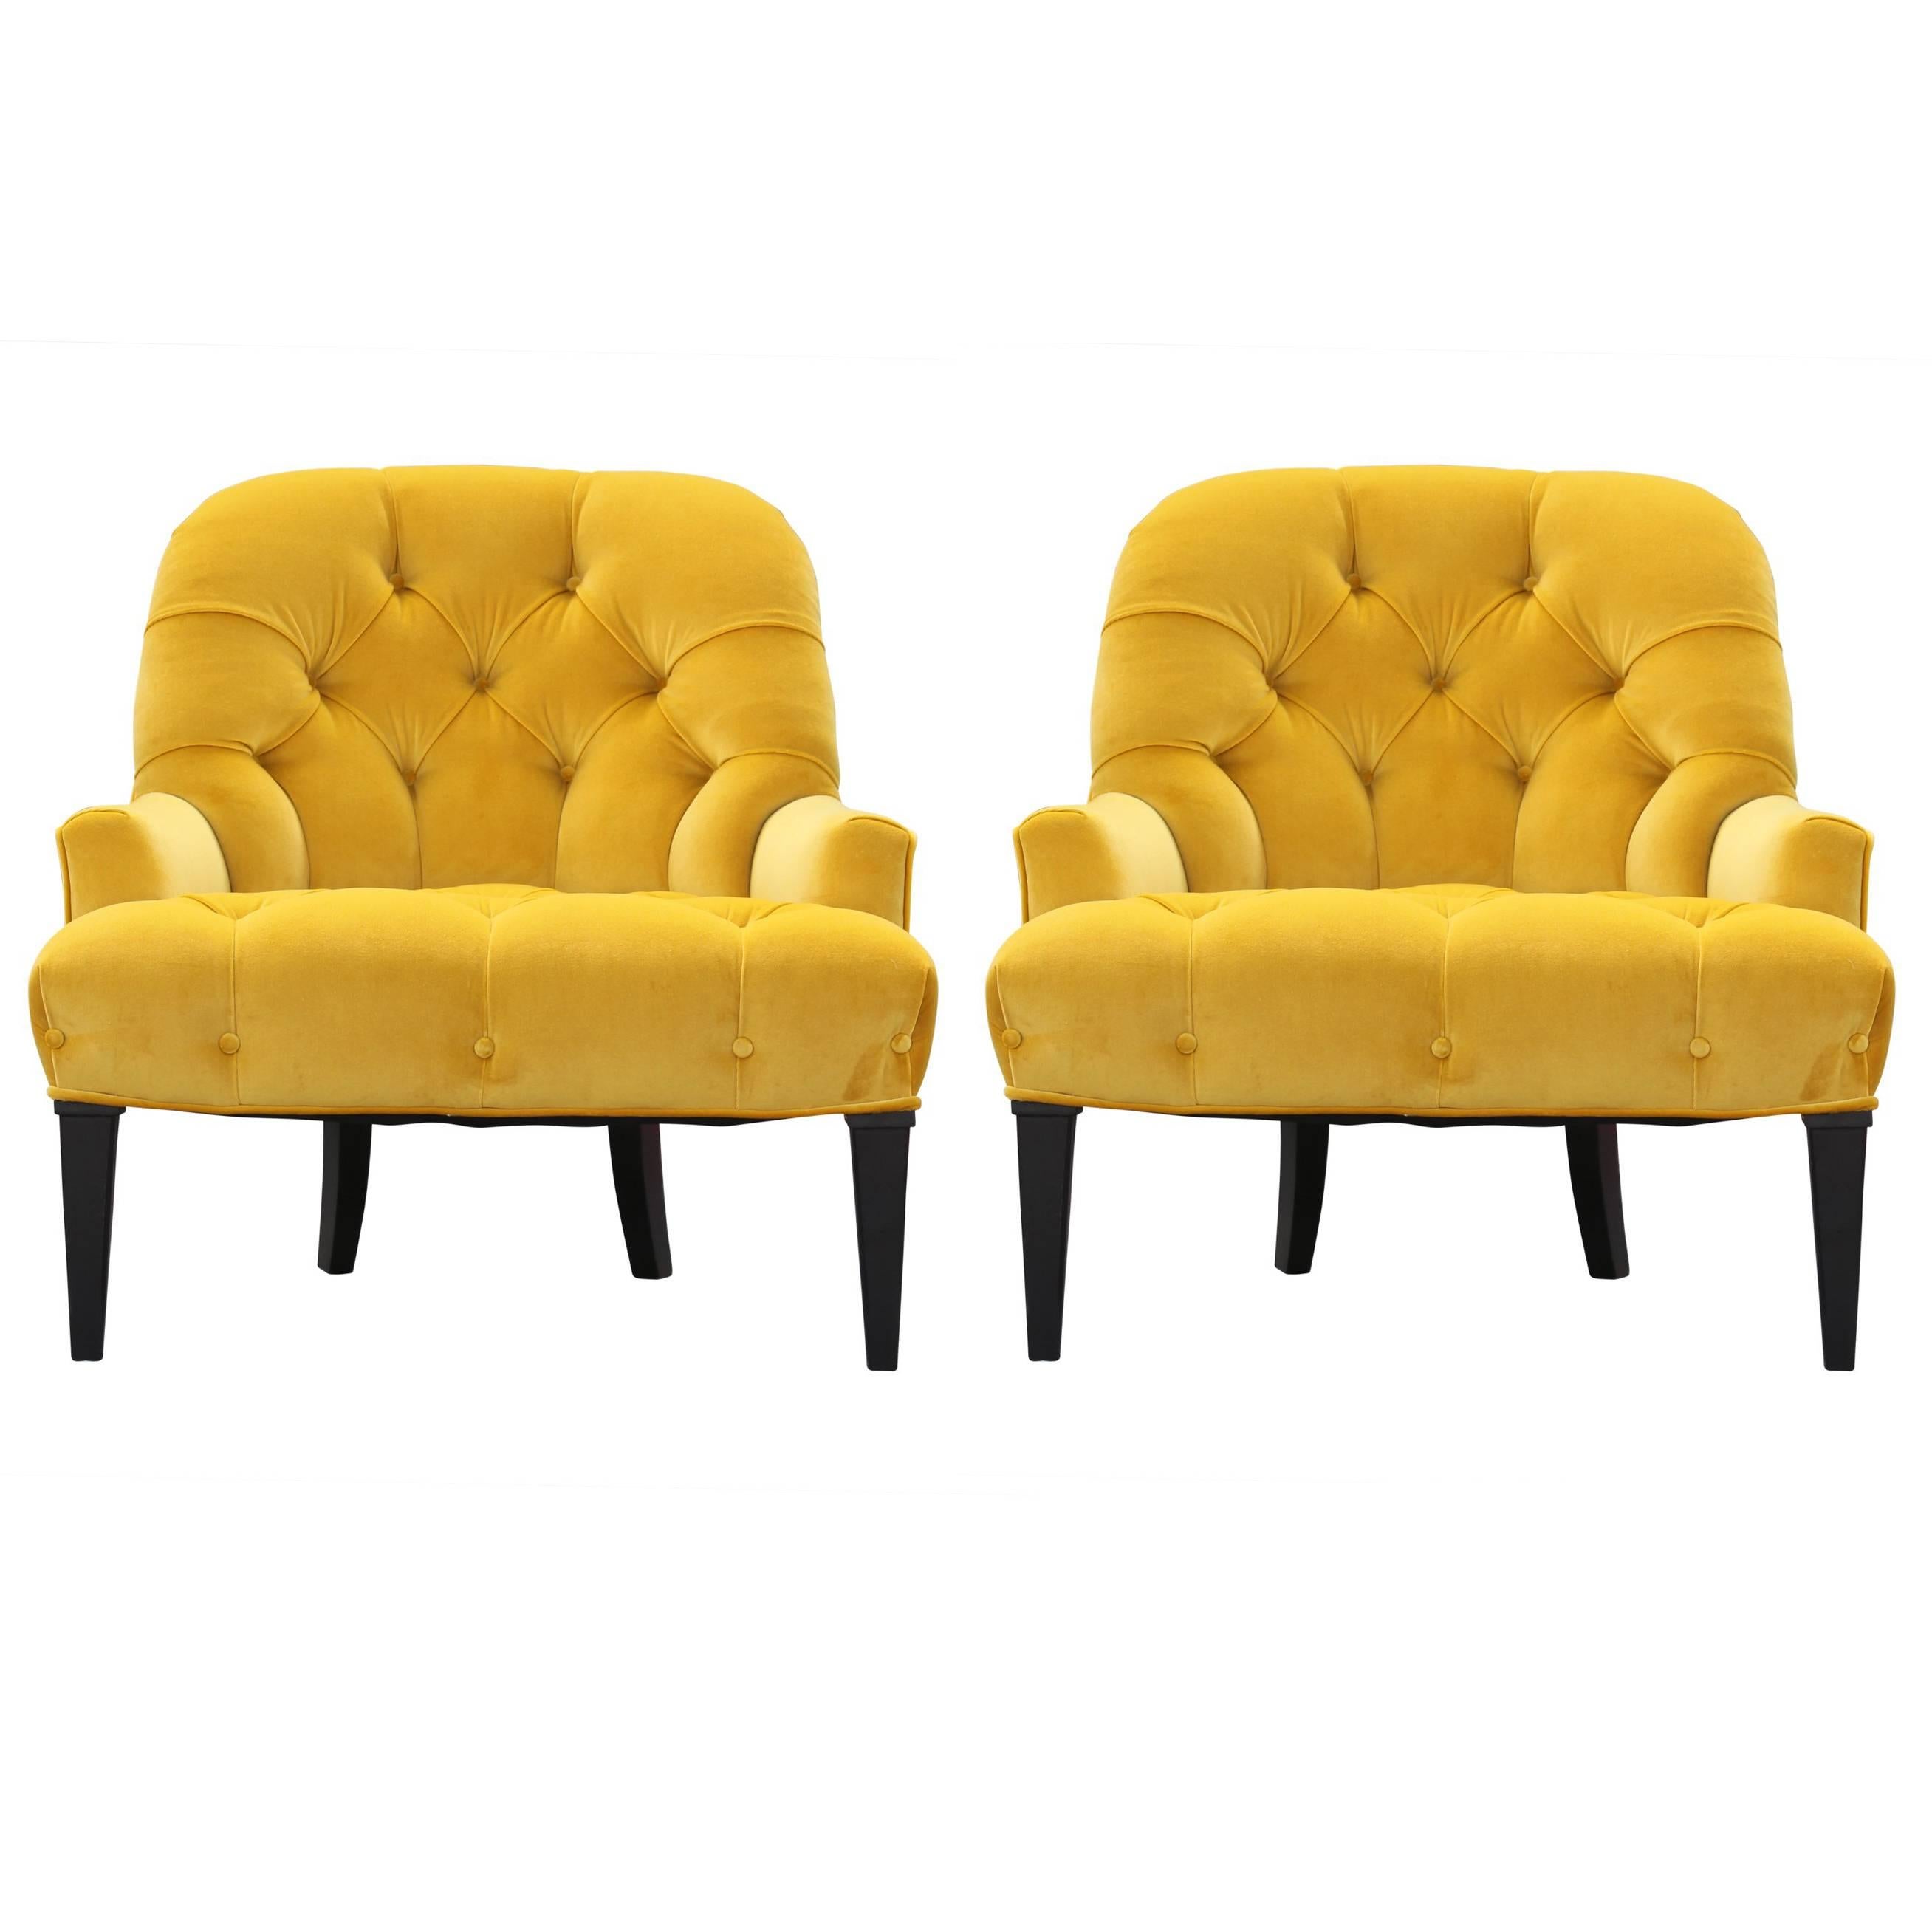 Pair of Modern French Slipper Lounge Chairs in Tufted Yellow Velvet